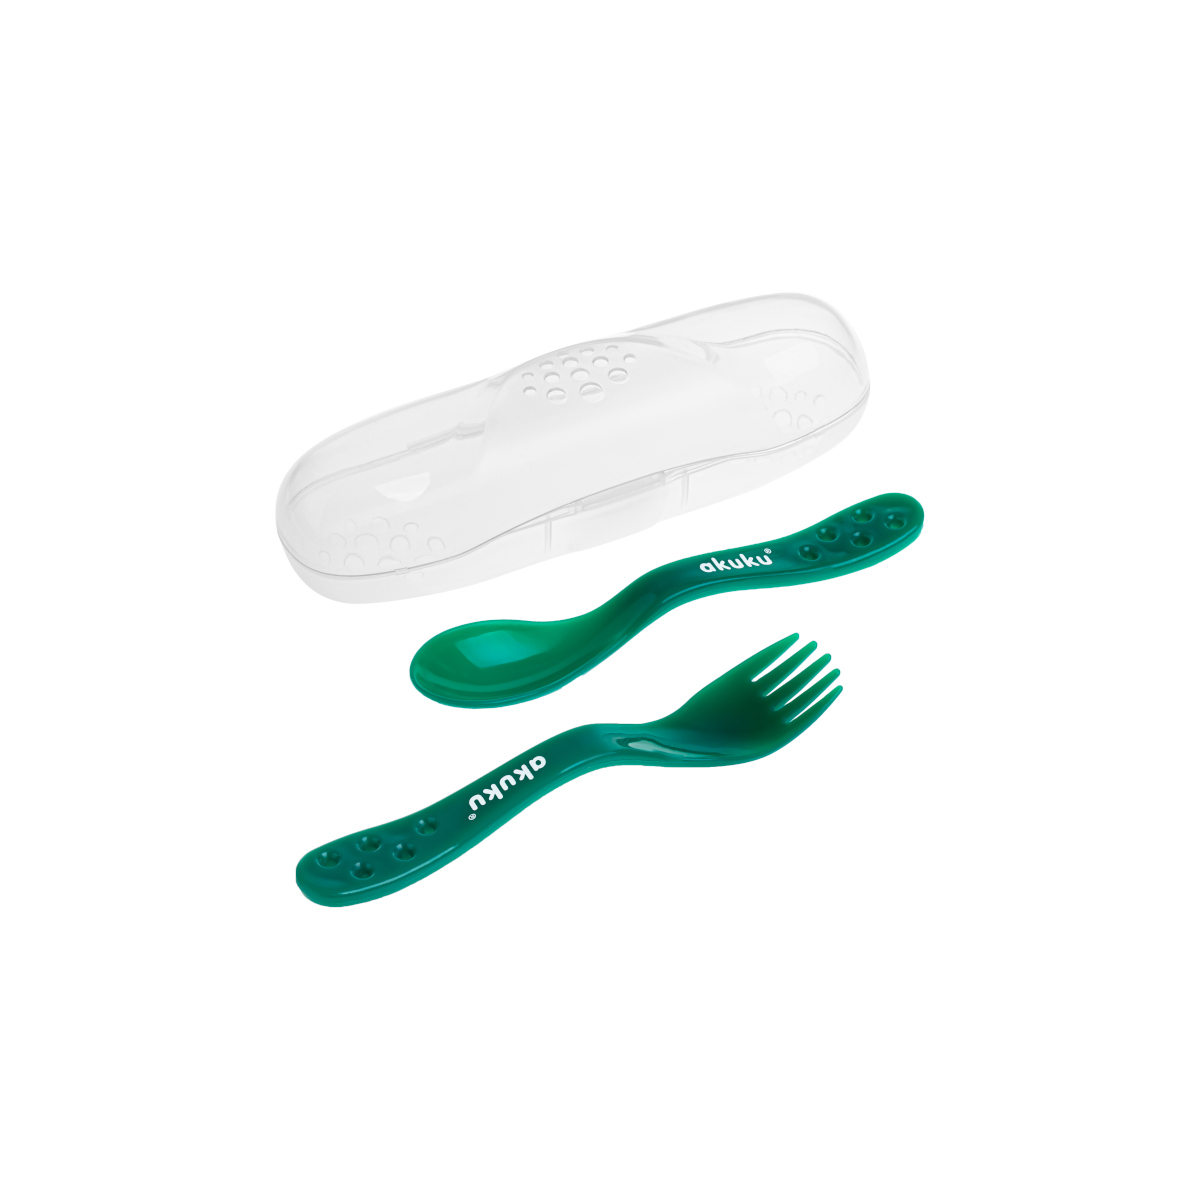 The cutlery set in case, green A0074